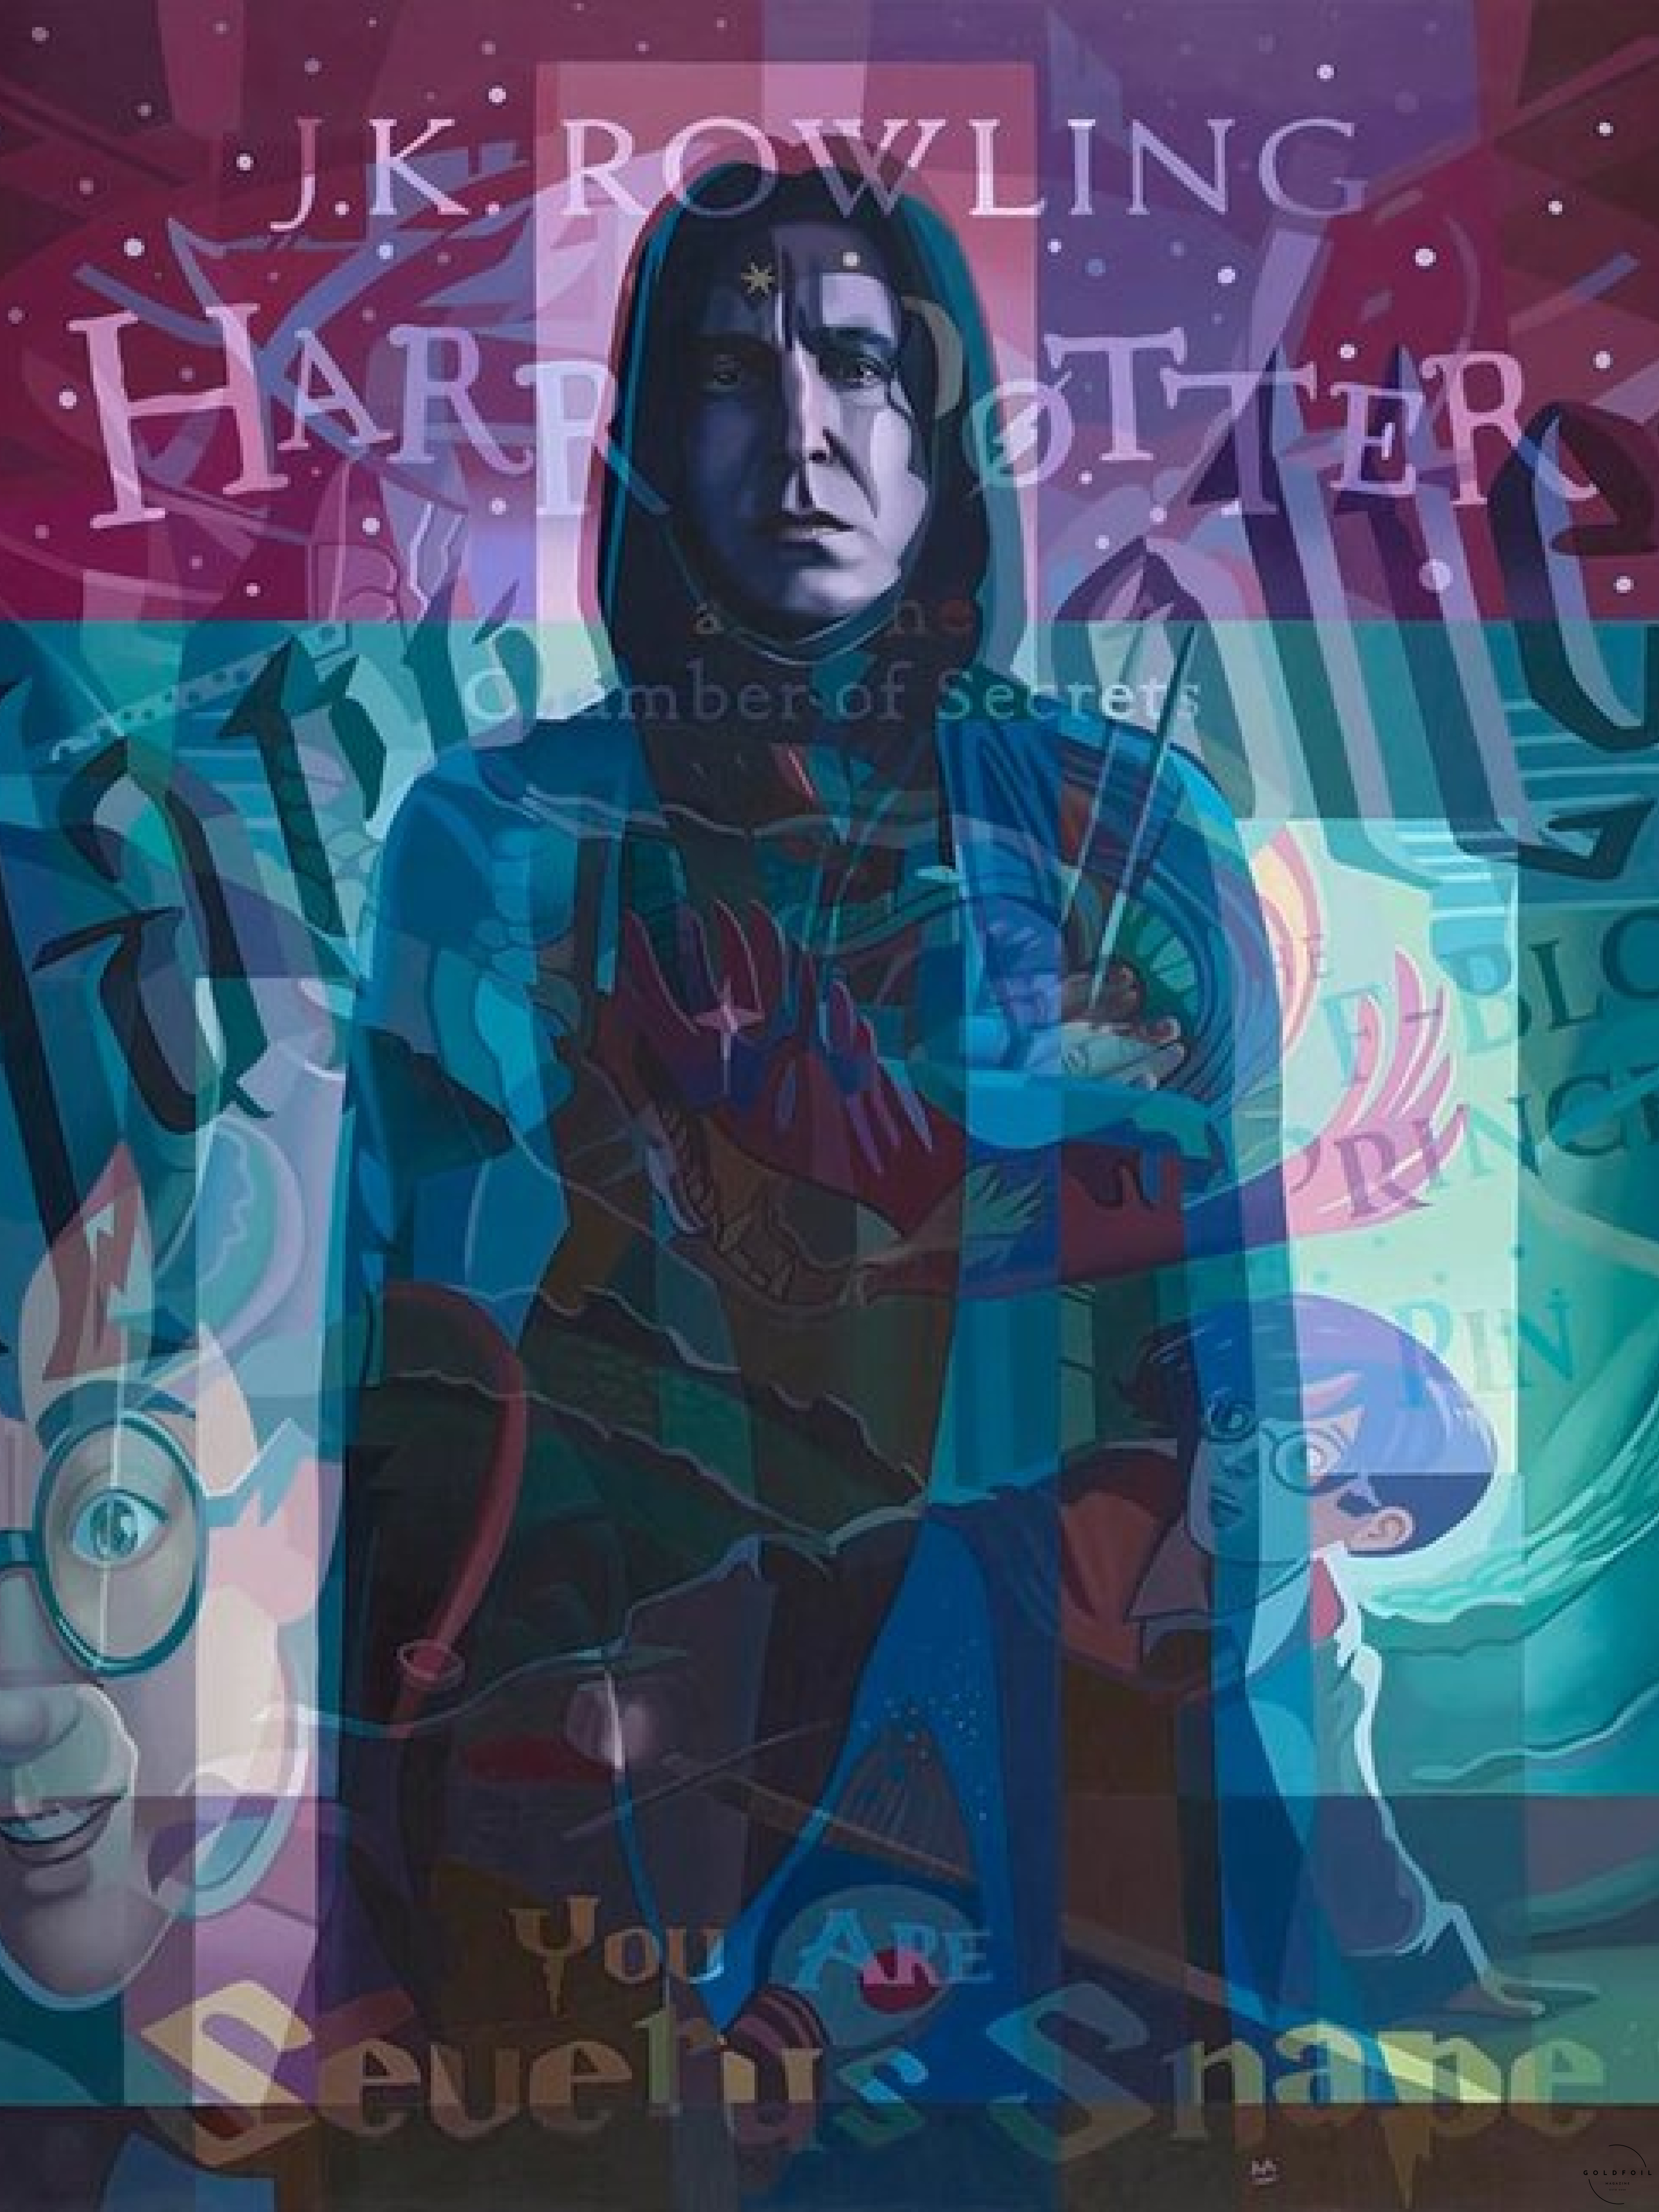 Stuart McAlpine Miller - Harry Potter inspired prints featuring the main characters